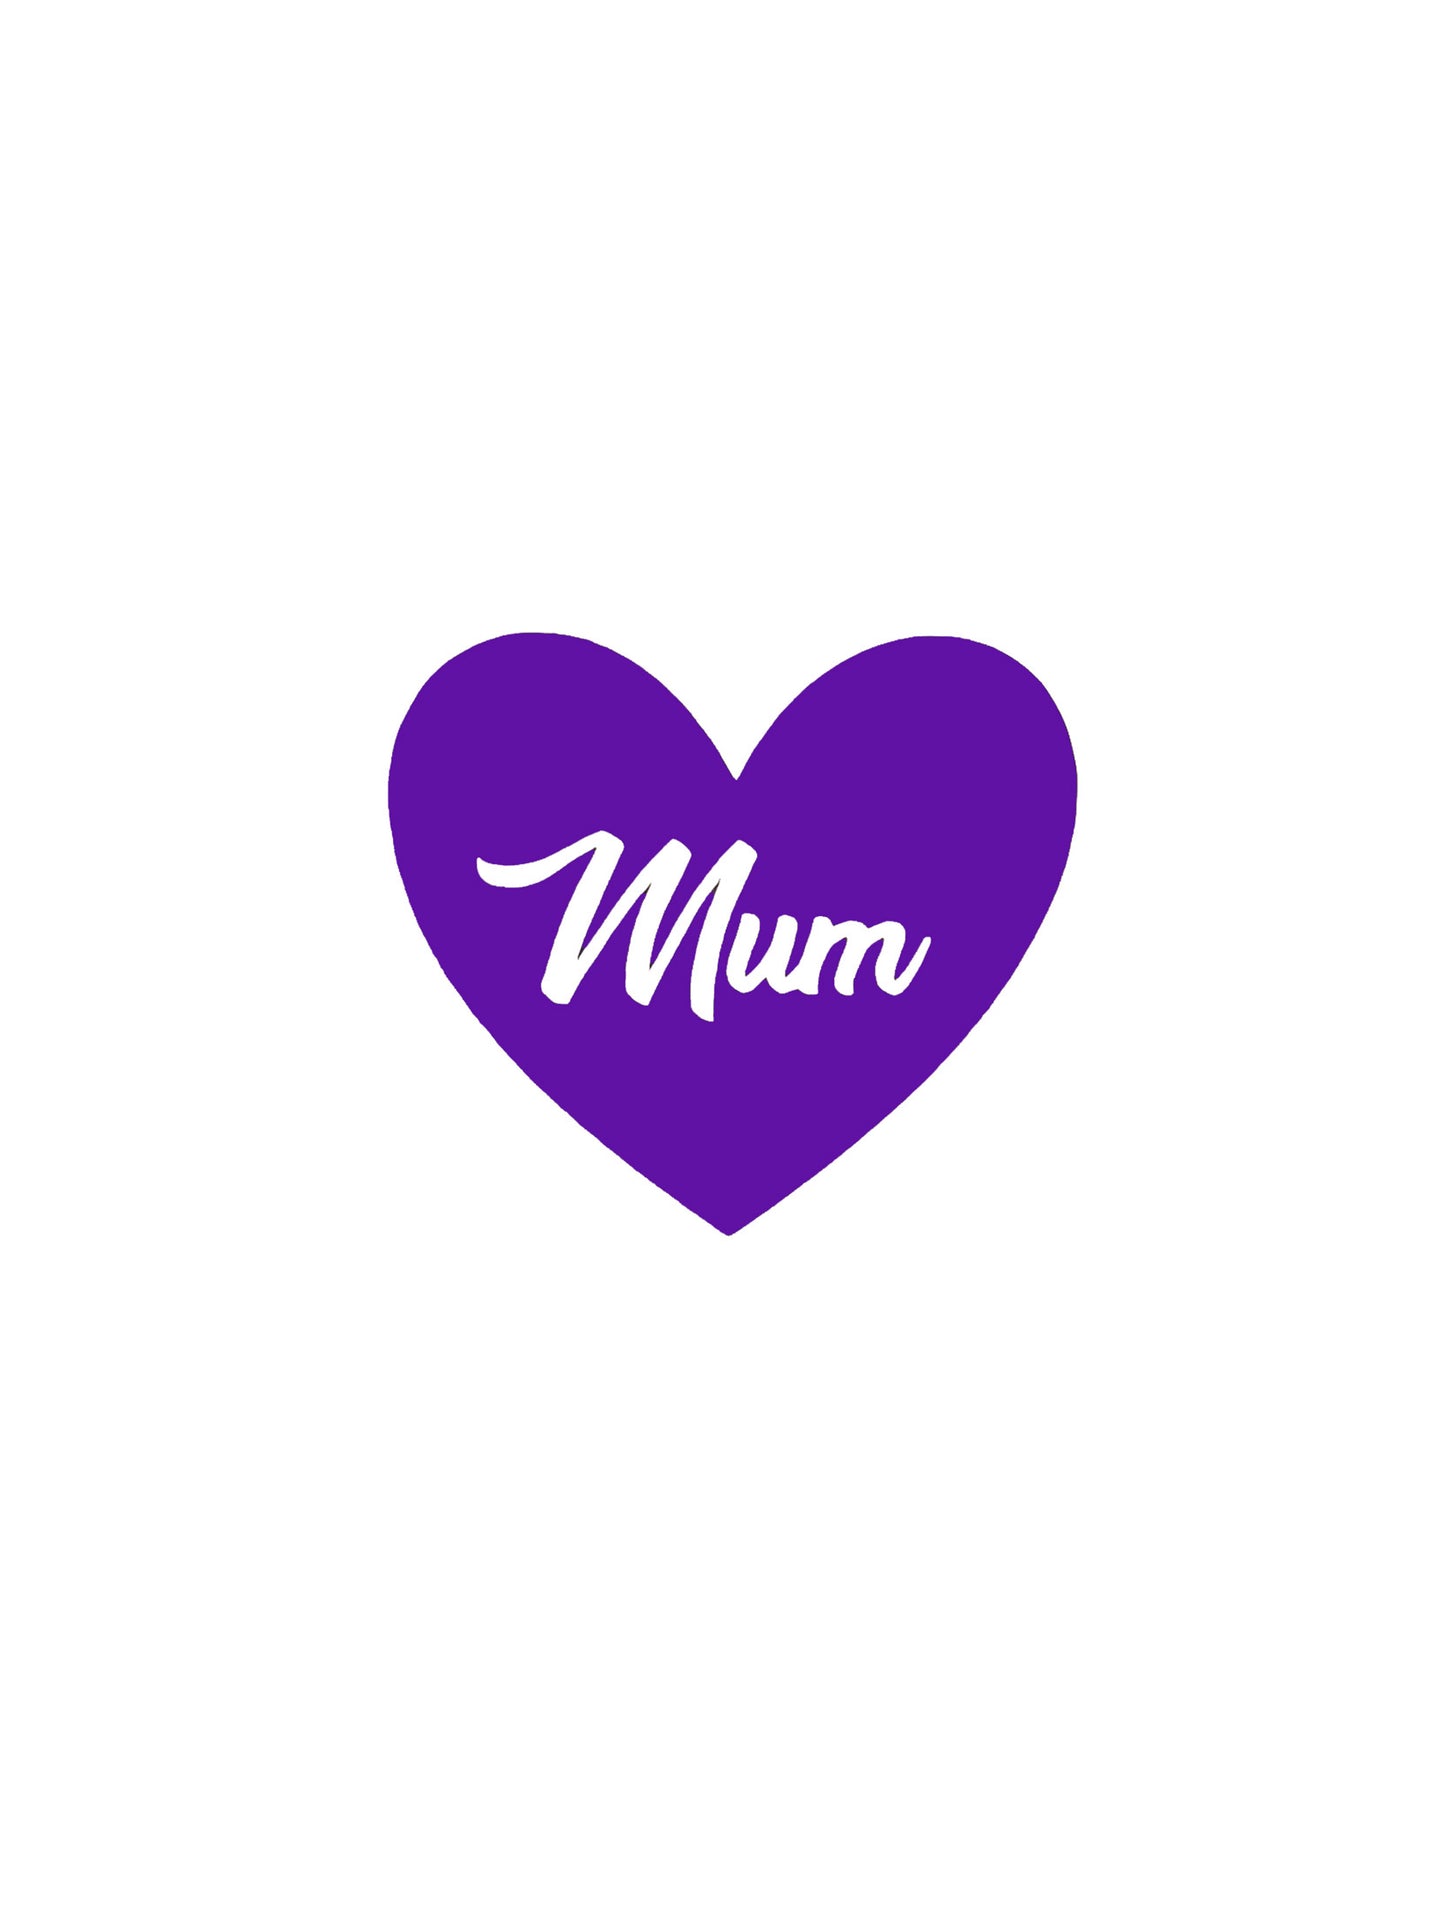 Mum within Heart Vinyl Decal Sticker - Perfect for Laptops, Windows, Mirrors, Wall Art